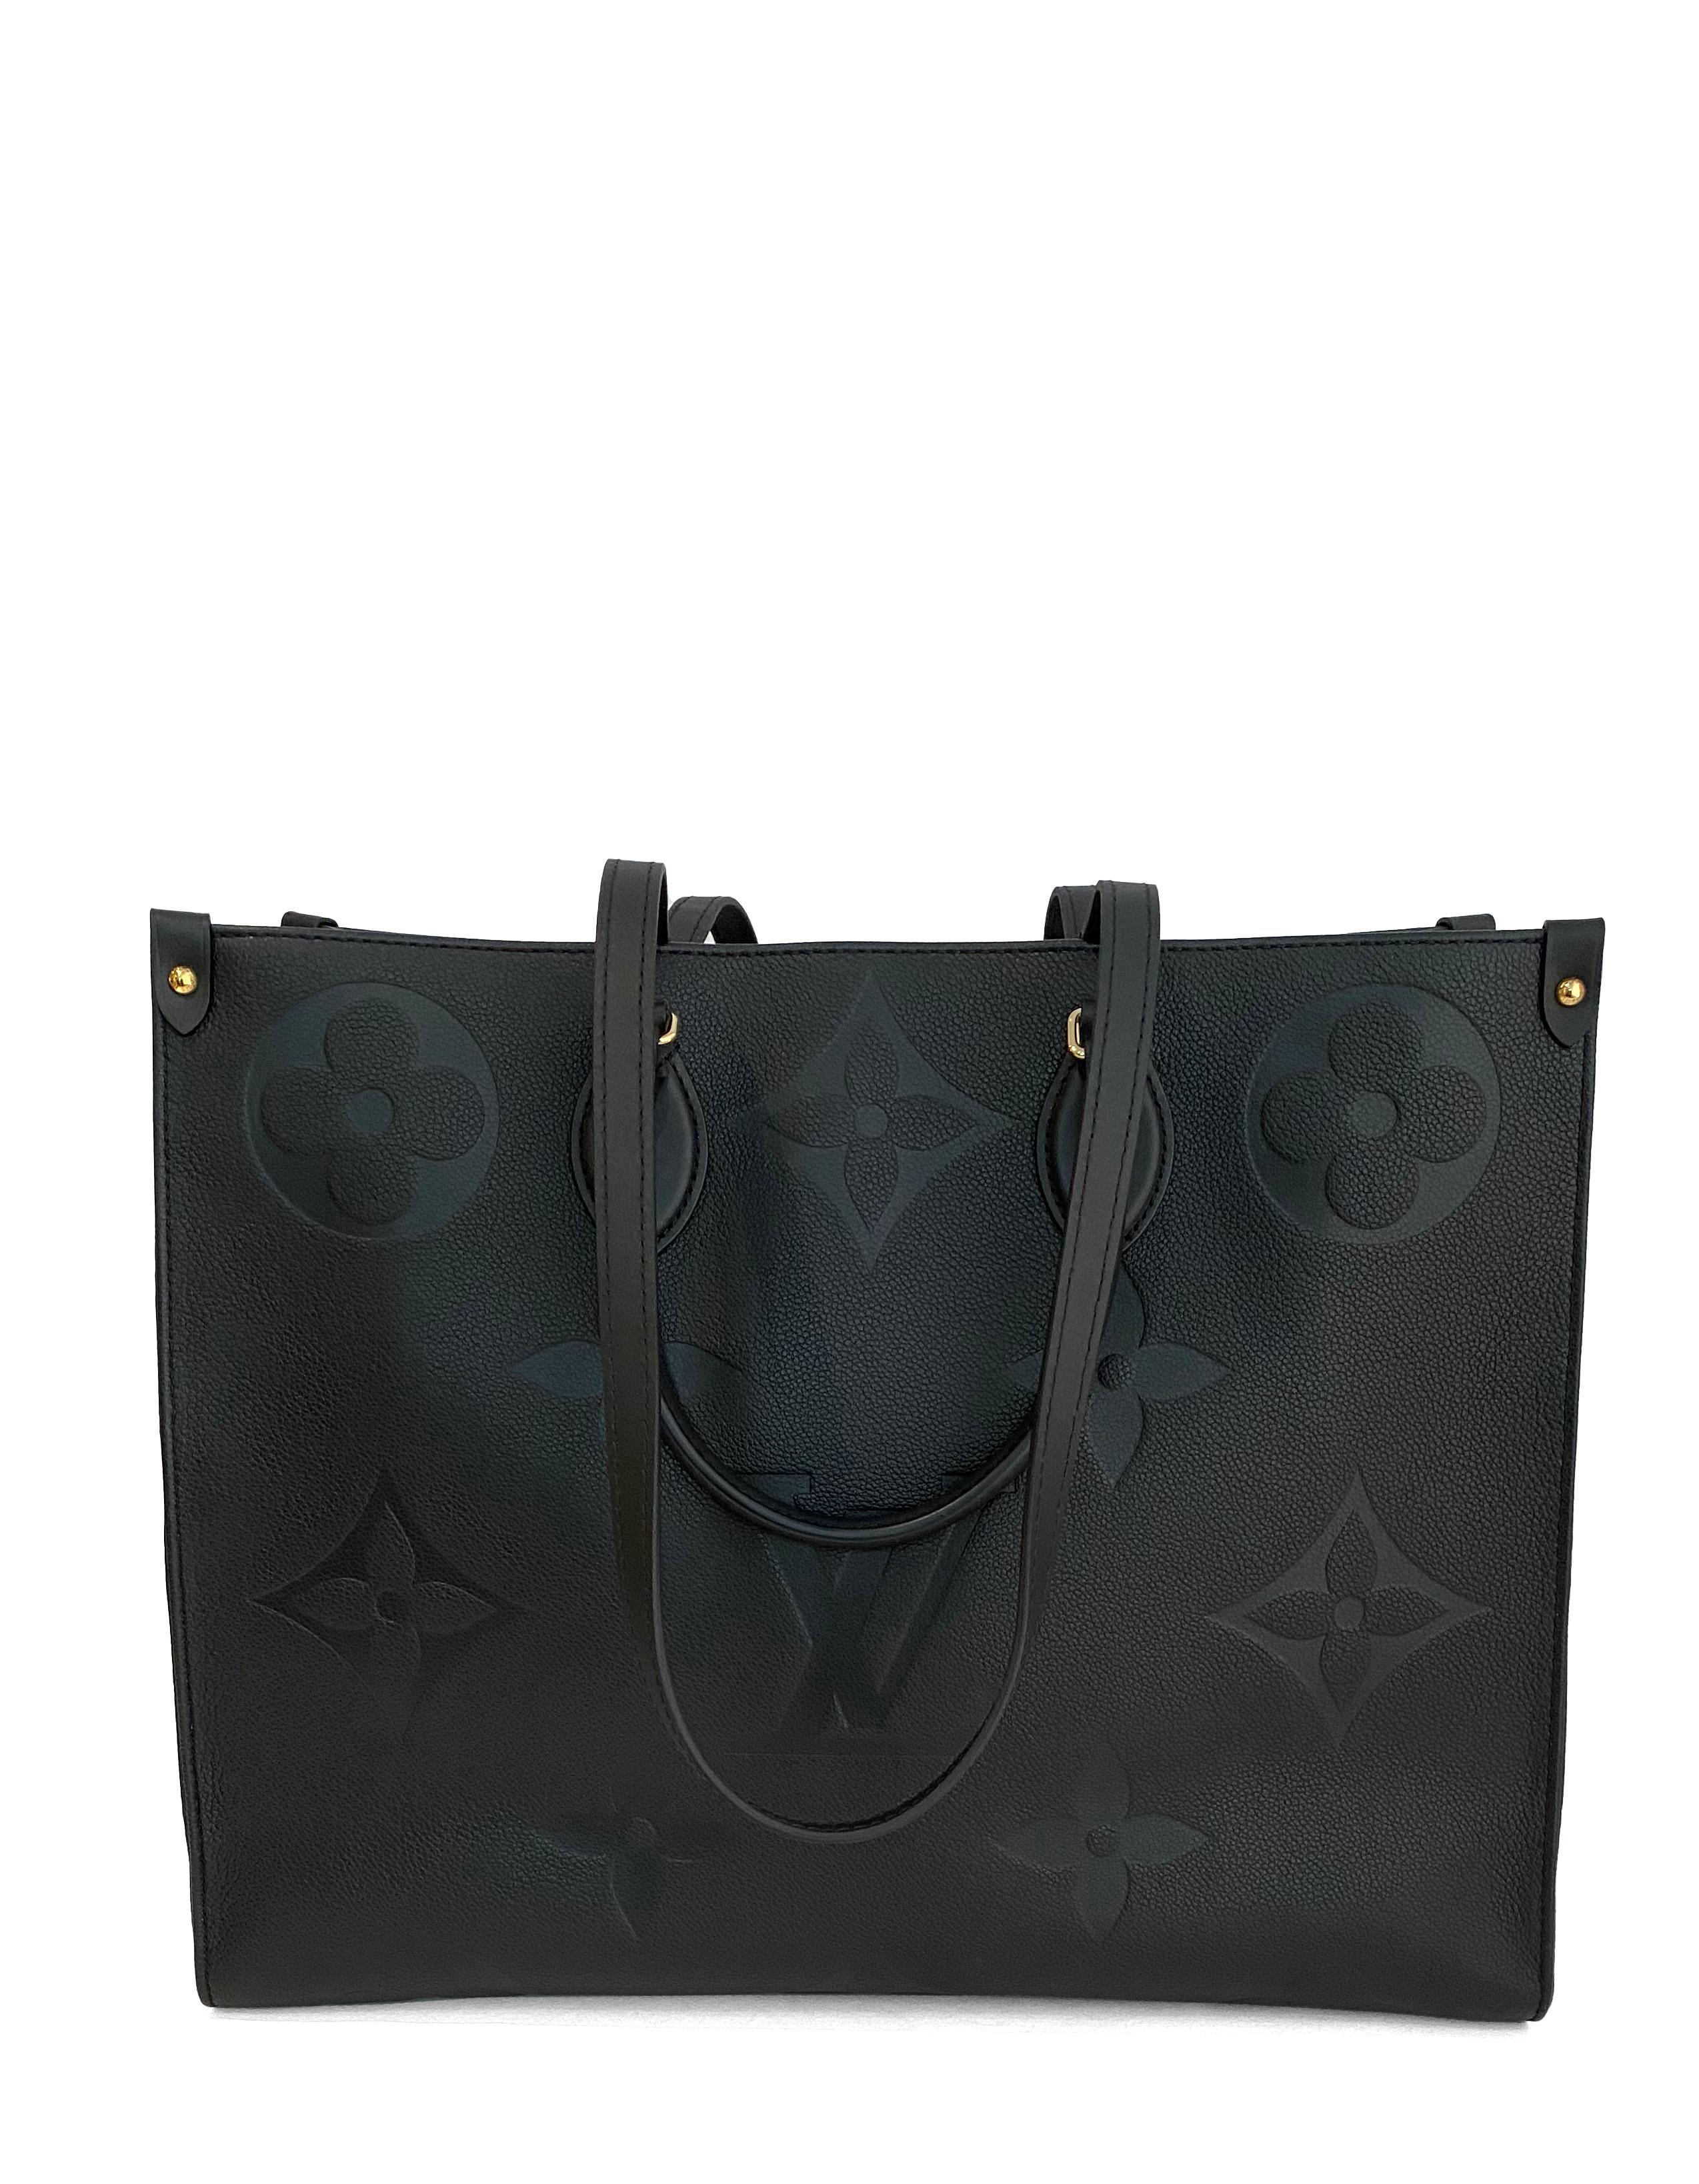 Louis Vuitton 2020 Black Monogram Empreinte Leather Giant Onthego GM Tote Bag In Excellent Condition In New York, NY